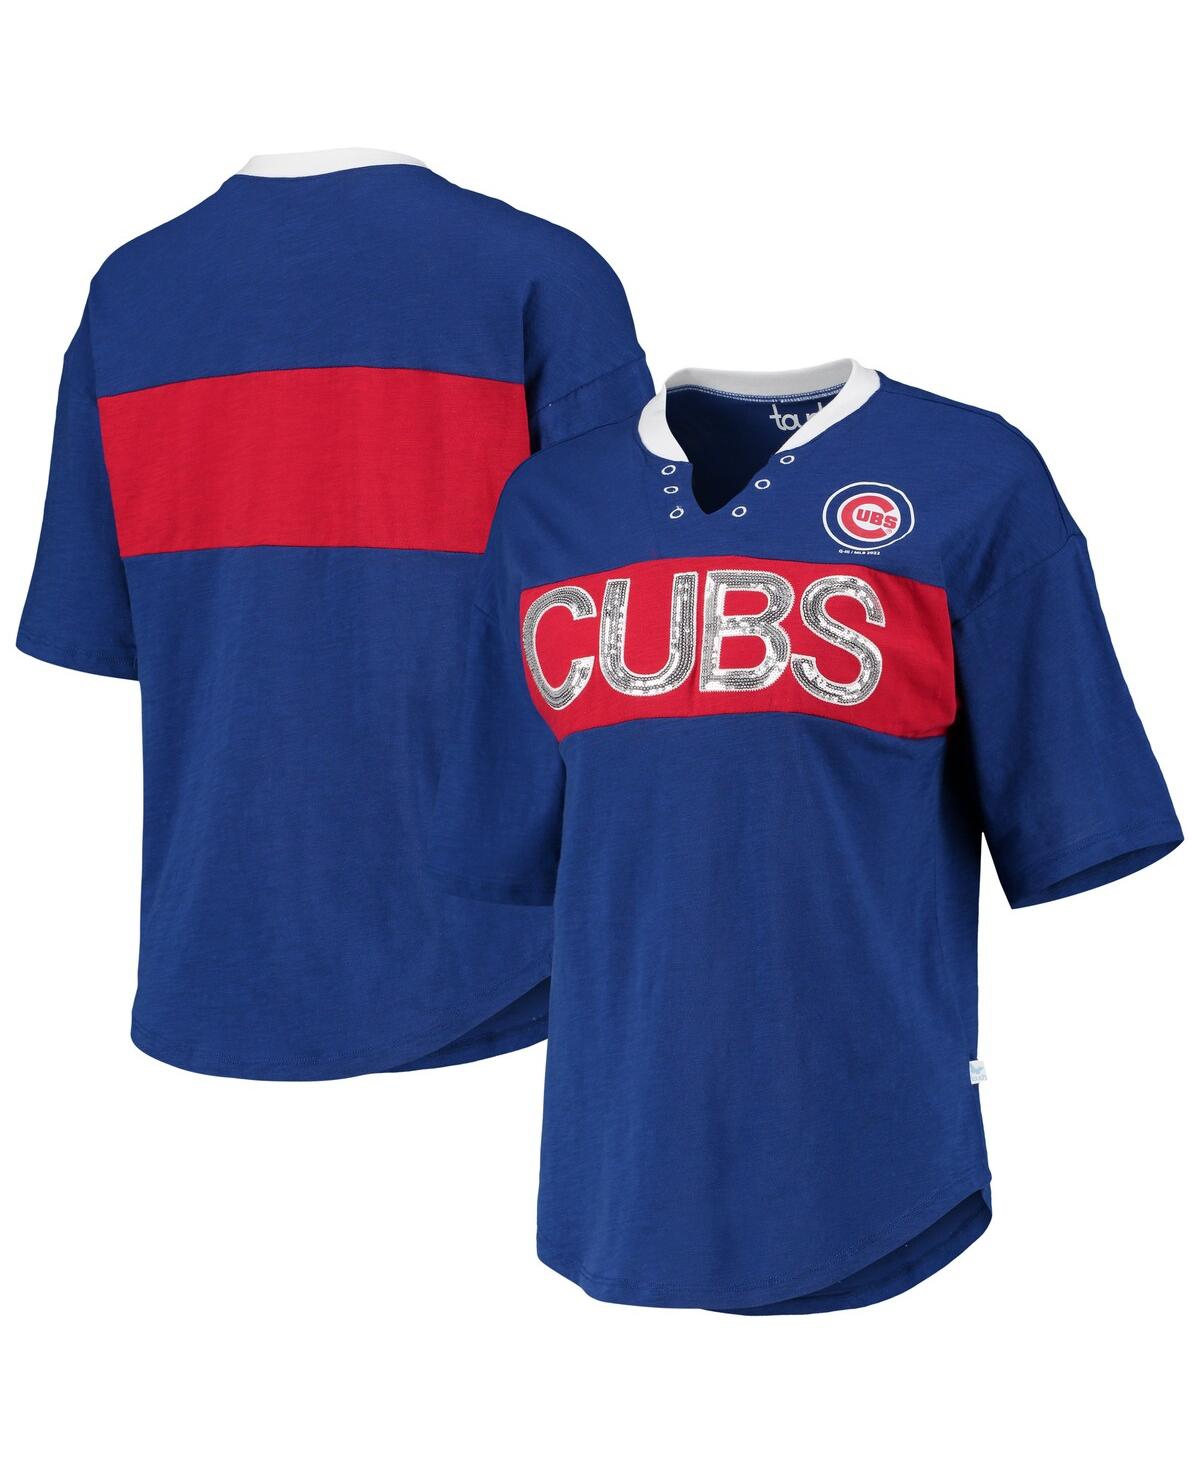 Women's Touch Royal and Red Chicago Cubs Lead Off Notch Neck T-shirt - Royal, Red